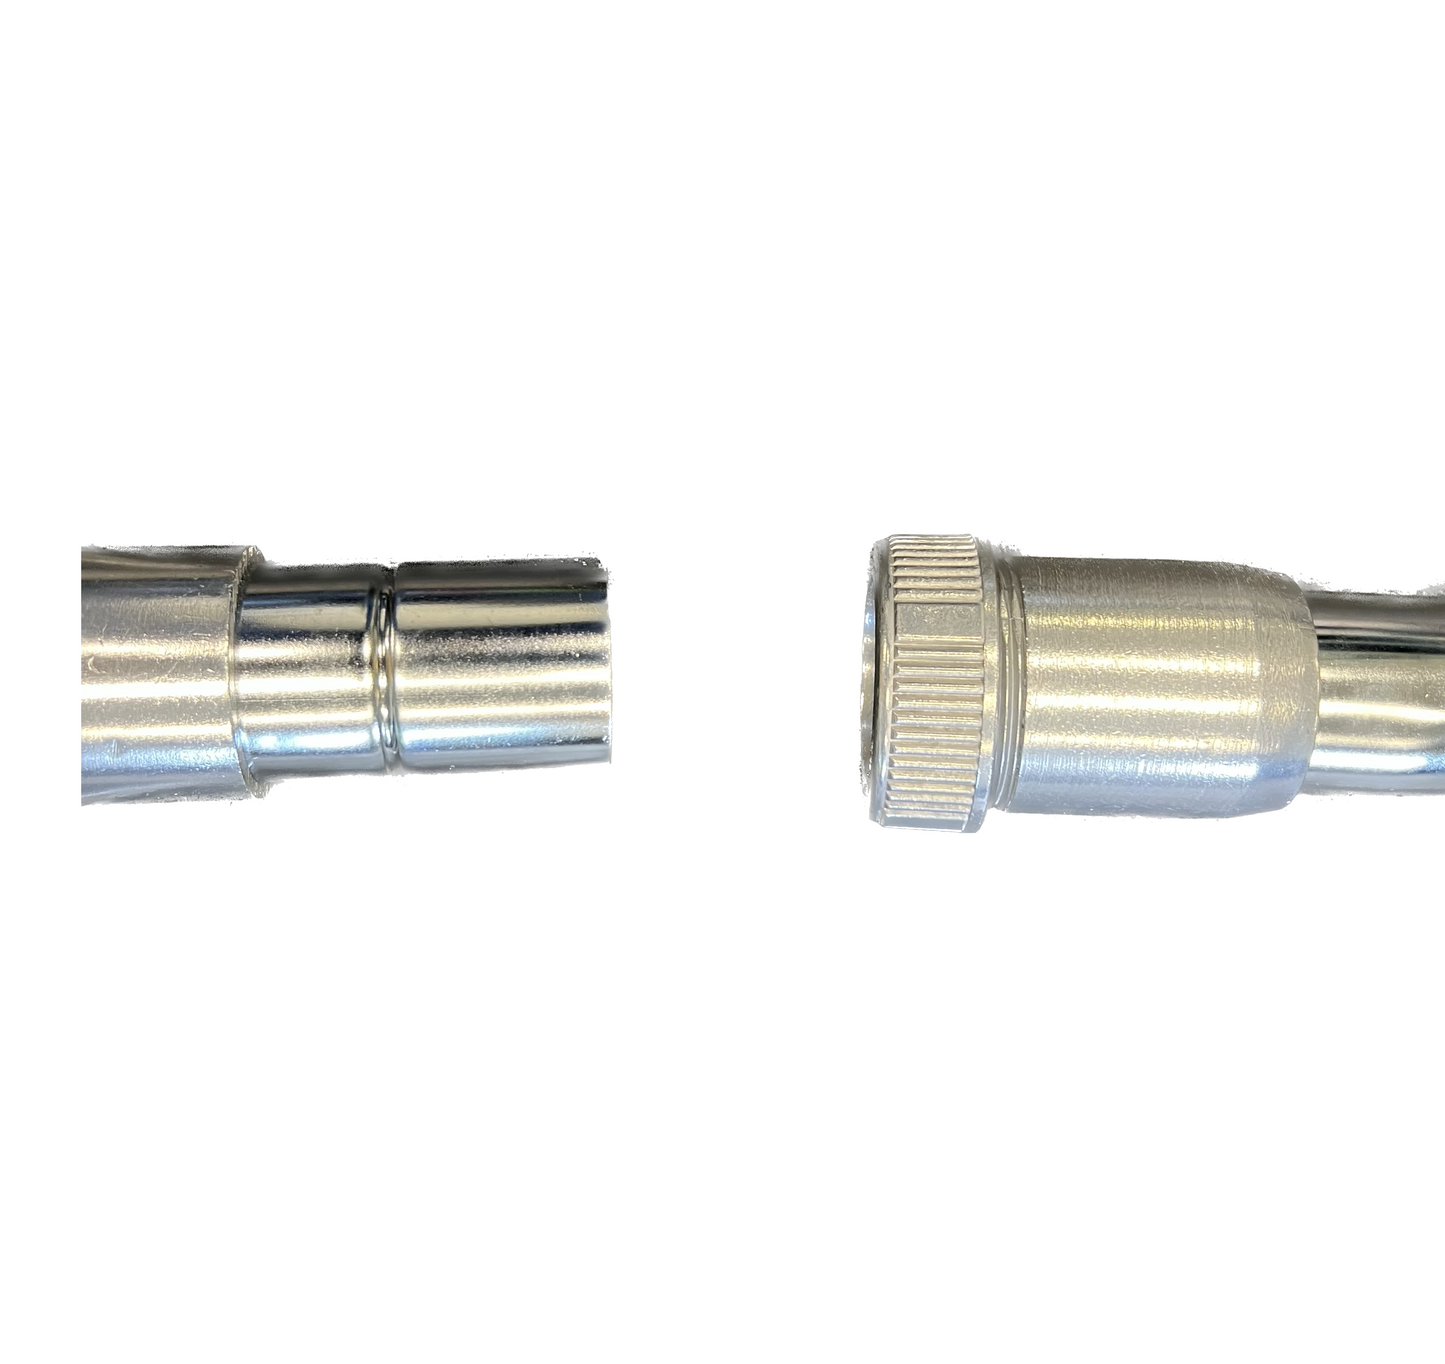 1-1/2" One Piece Vacuum Cleaning Wand - 54" Steel Tube - Metal Coupling- Friction Fit- Flexaust / TUEC 21C5